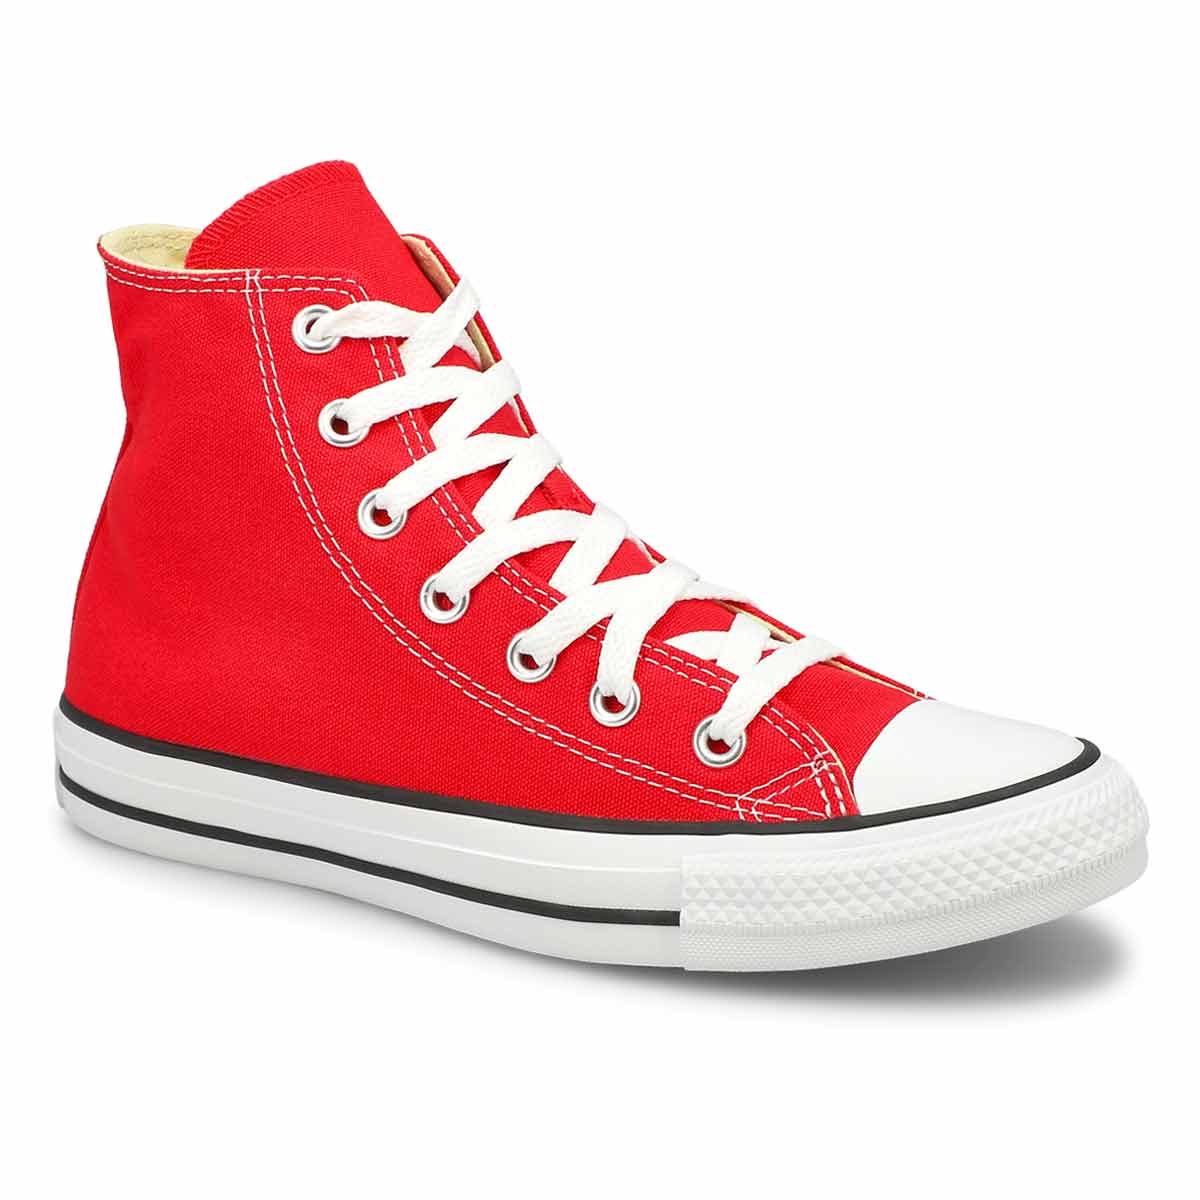 red converse high tops size 5